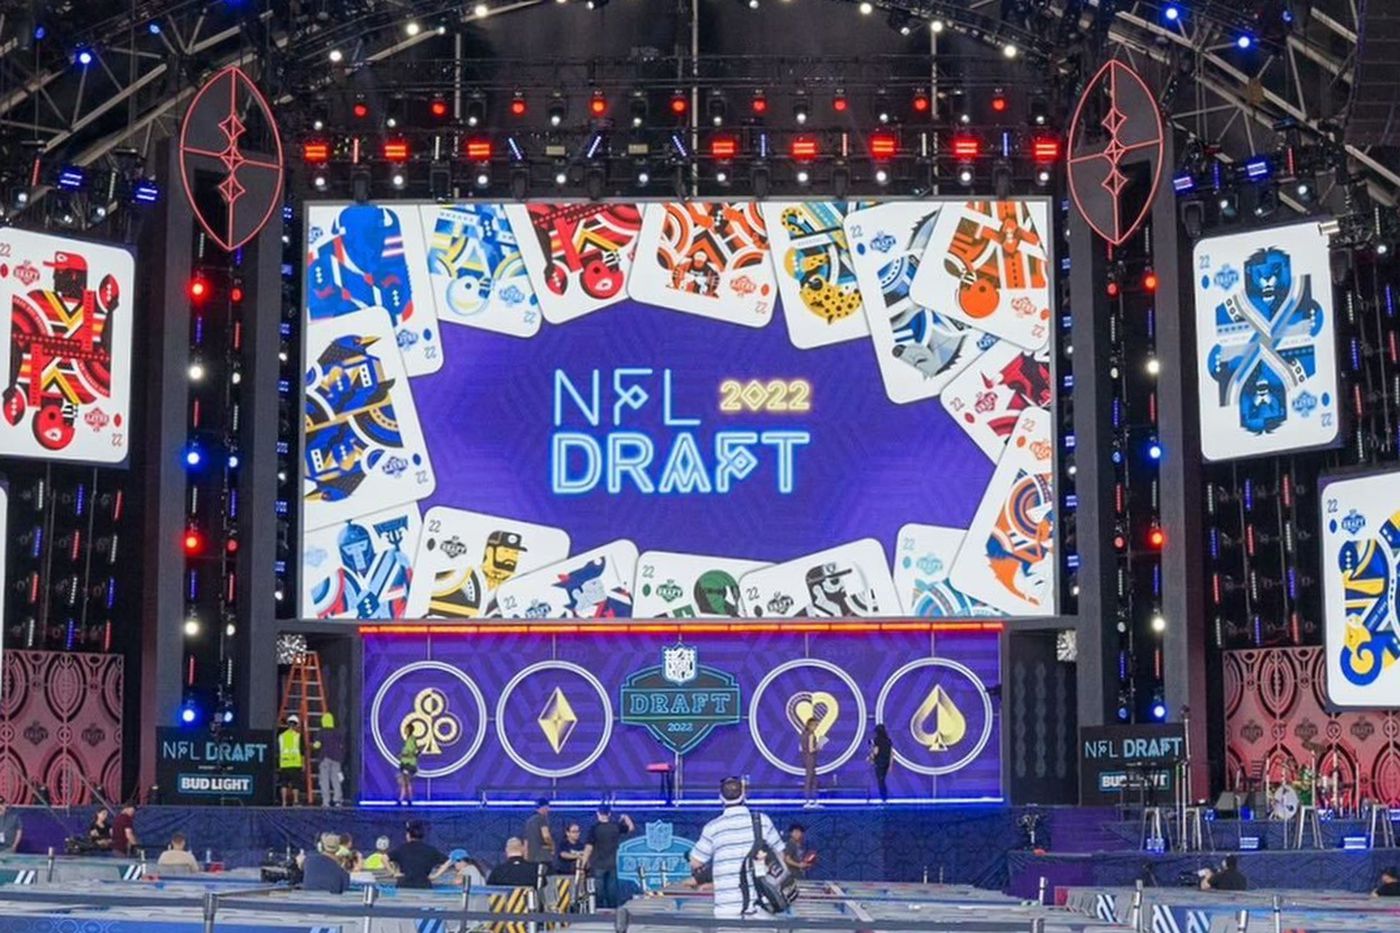 NFL Draft results: Patriots surprise everybody in Round 1 - Pats Pulpit